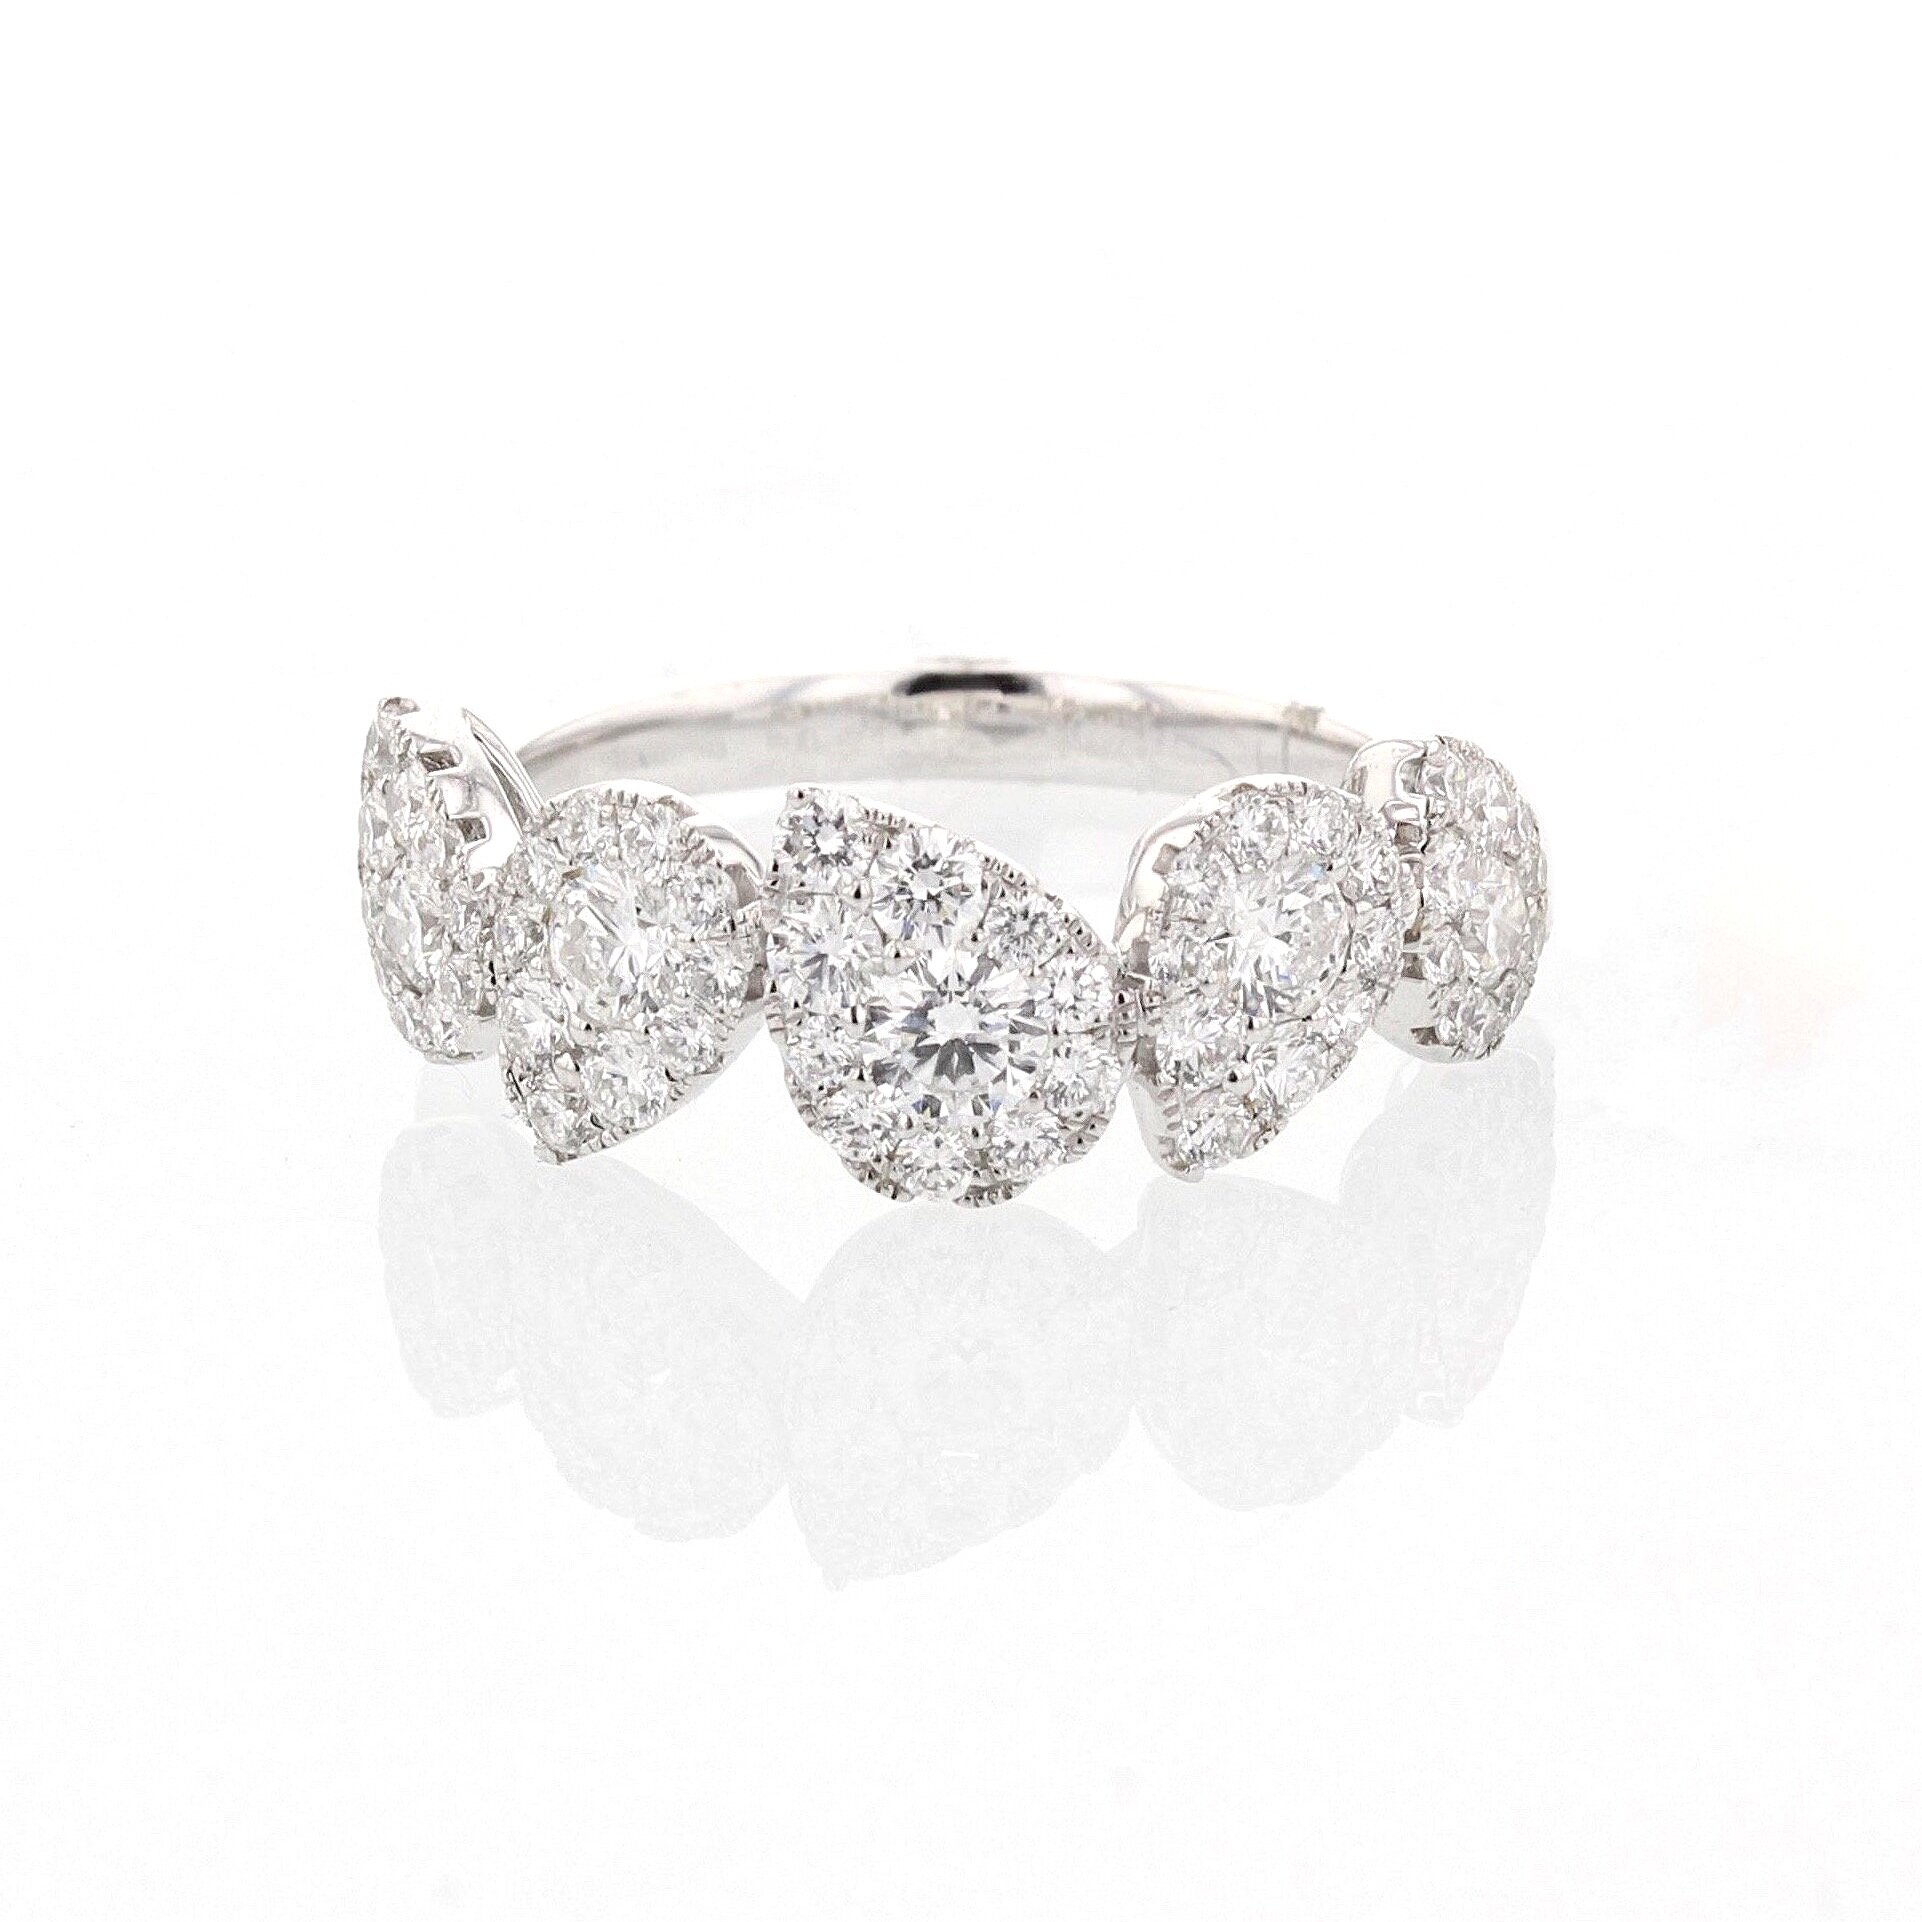 Pear shaped clusters of Diamond Pavé (1.21 ctw.) set in 14K white gold. $4975